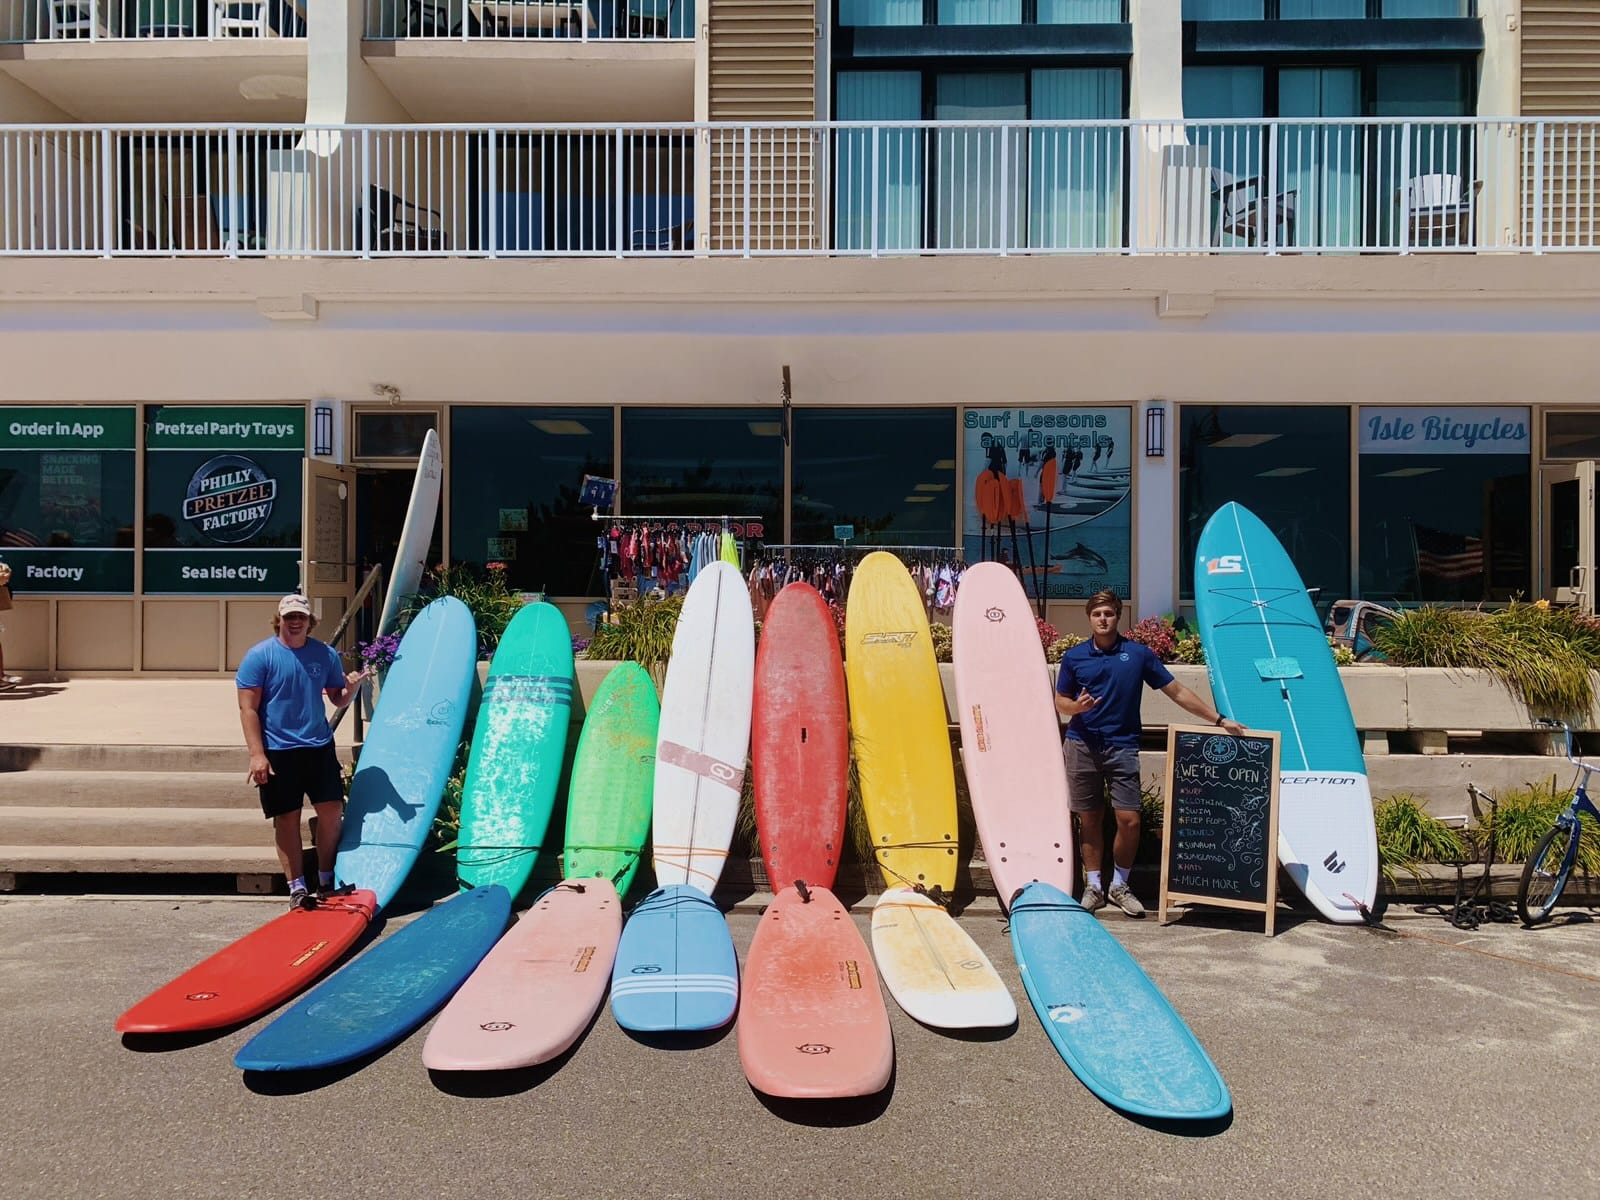 USED SURFBOARD SALE! Call to inquire.